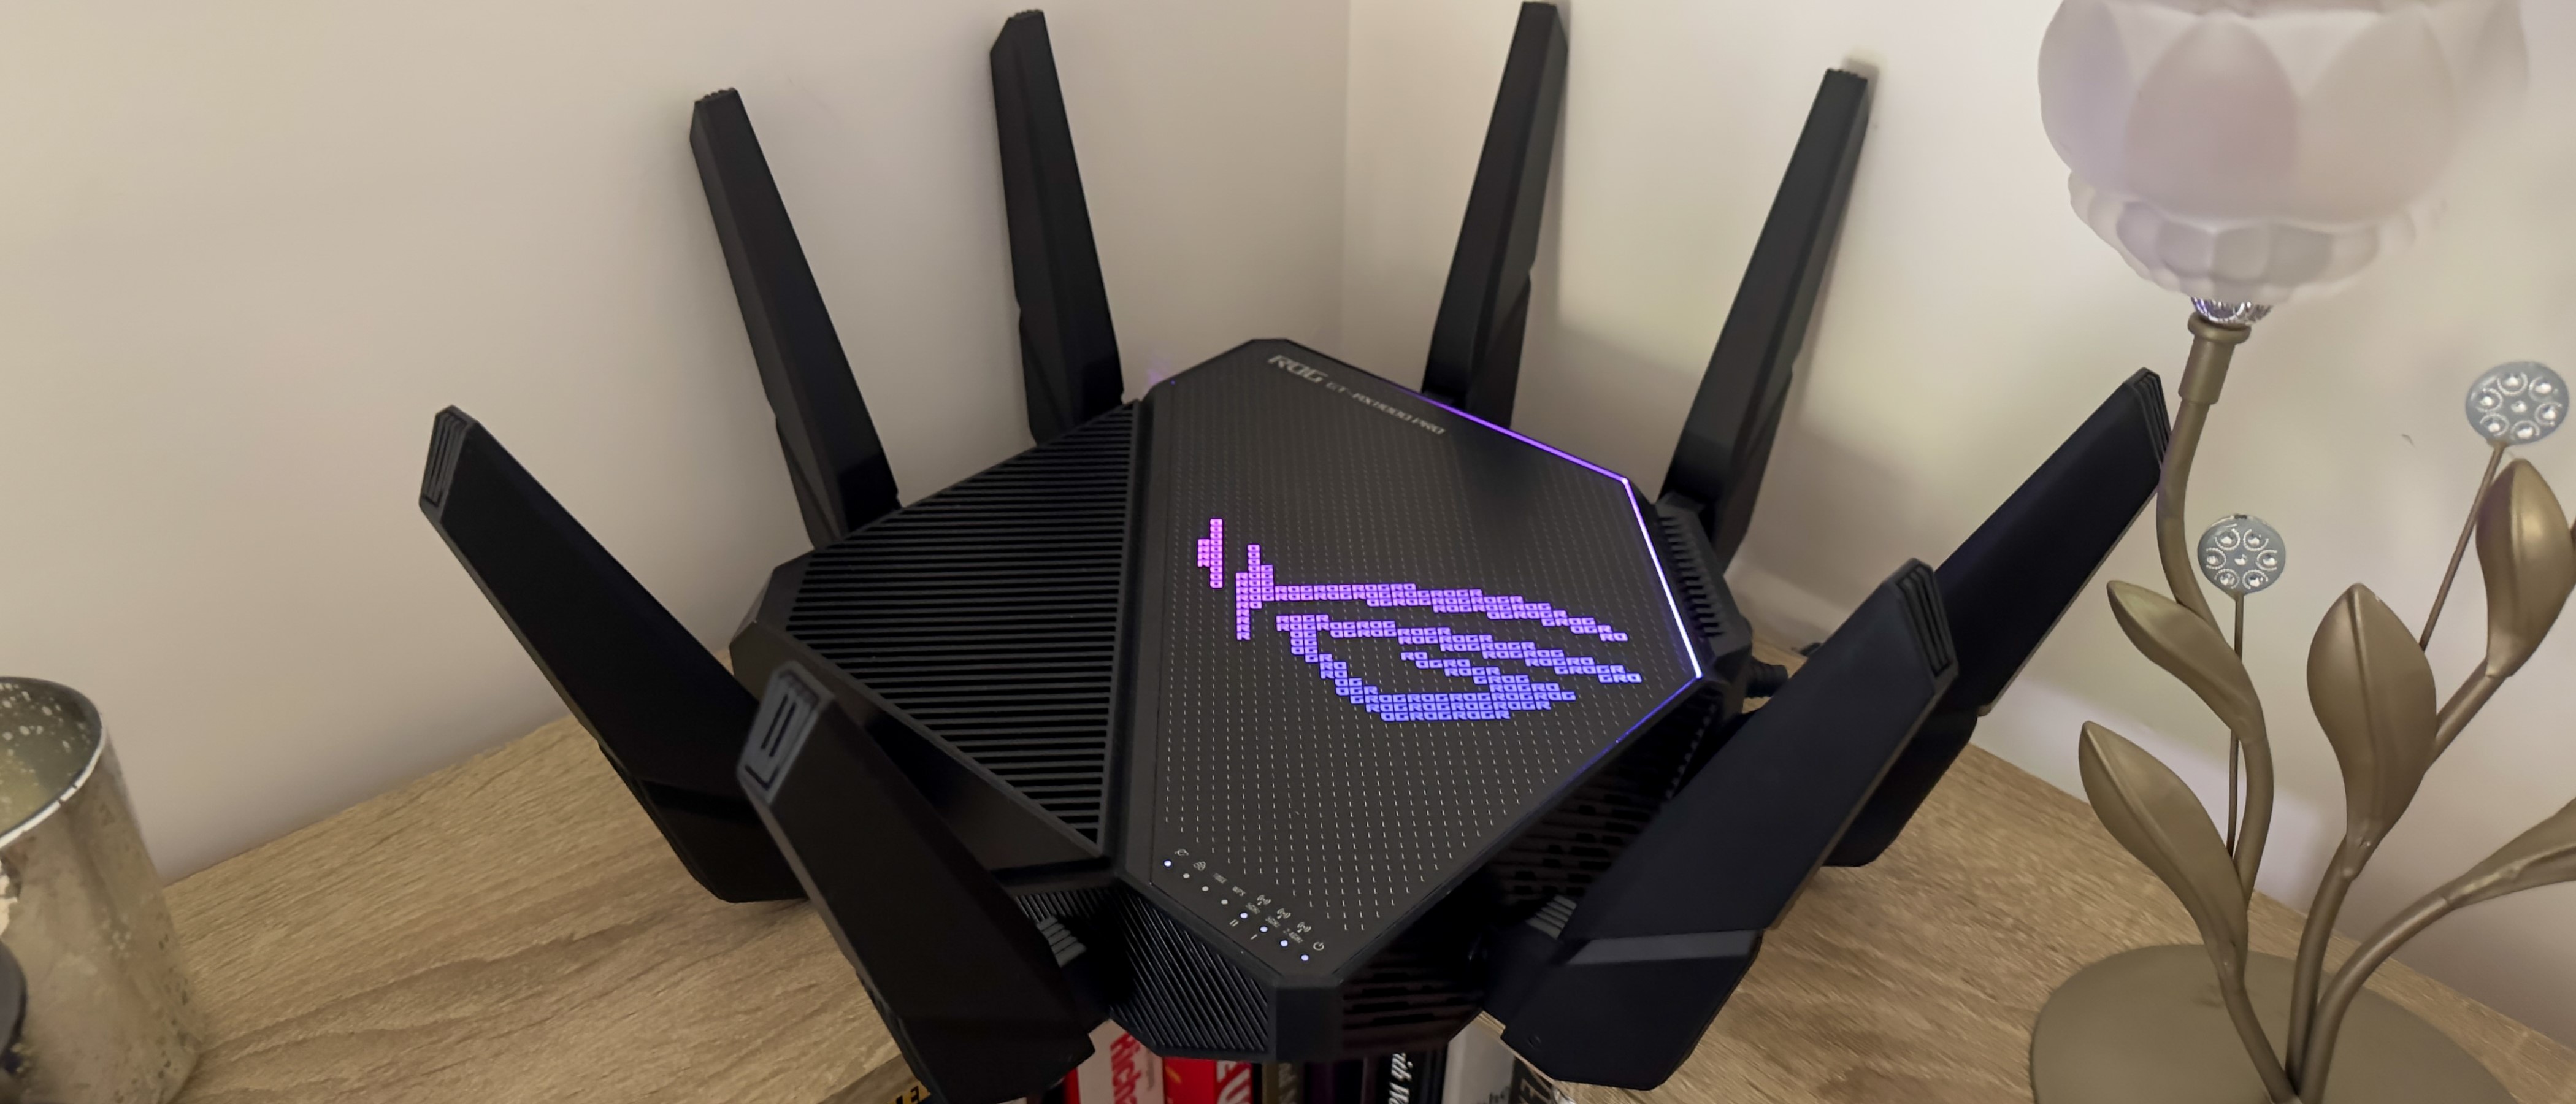 GT-AX11000 Pro Review: Asus’s Best Tri-band Wi-Fi 6 Router